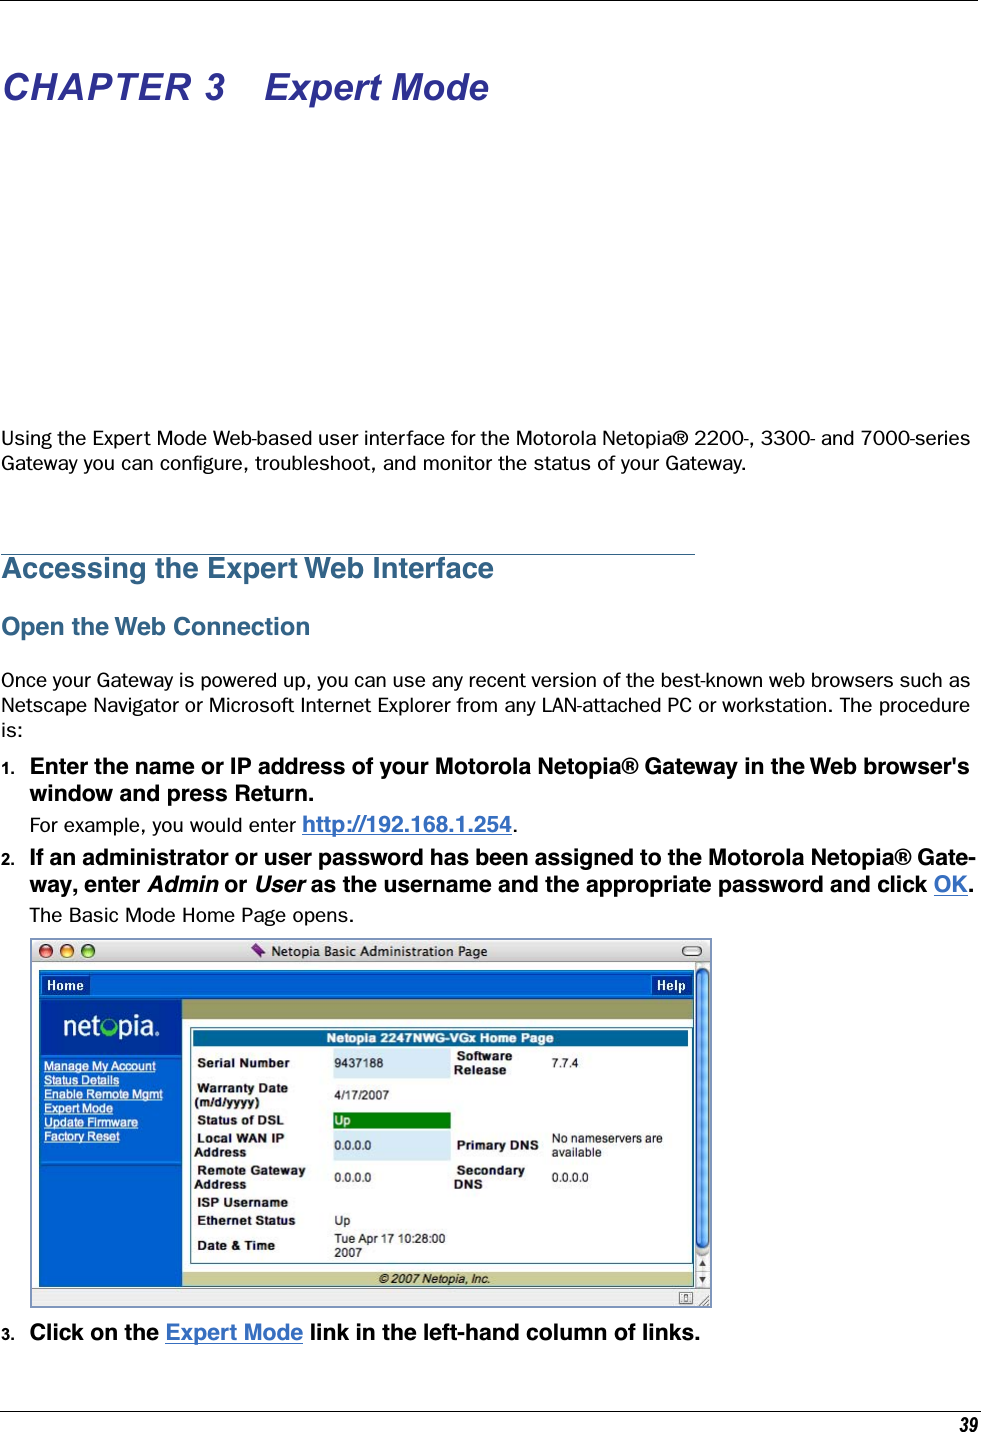 39CHAPTER 3 Expert ModeUsing the Expert Mode Web-based user interface for the Motorola Netopia® 2200-, 3300- and 7000-series Gateway you can conﬁgure, troubleshoot, and monitor the status of your Gateway. Accessing the Expert Web InterfaceOpen the Web ConnectionOnce your Gateway is powered up, you can use any recent version of the best-known web browsers such as Netscape Navigator or Microsoft Internet Explorer from any LAN-attached PC or workstation. The procedure is:1. Enter the name or IP address of your Motorola Netopia® Gateway in the Web browser&apos;s window and press Return.For example, you would enter http://192.168.1.254.2. If an administrator or user password has been assigned to the Motorola Netopia® Gate-way, enter Admin or User as the username and the appropriate password and click OK.The Basic Mode Home Page opens.3. Click on the Expert Mode link in the left-hand column of links.